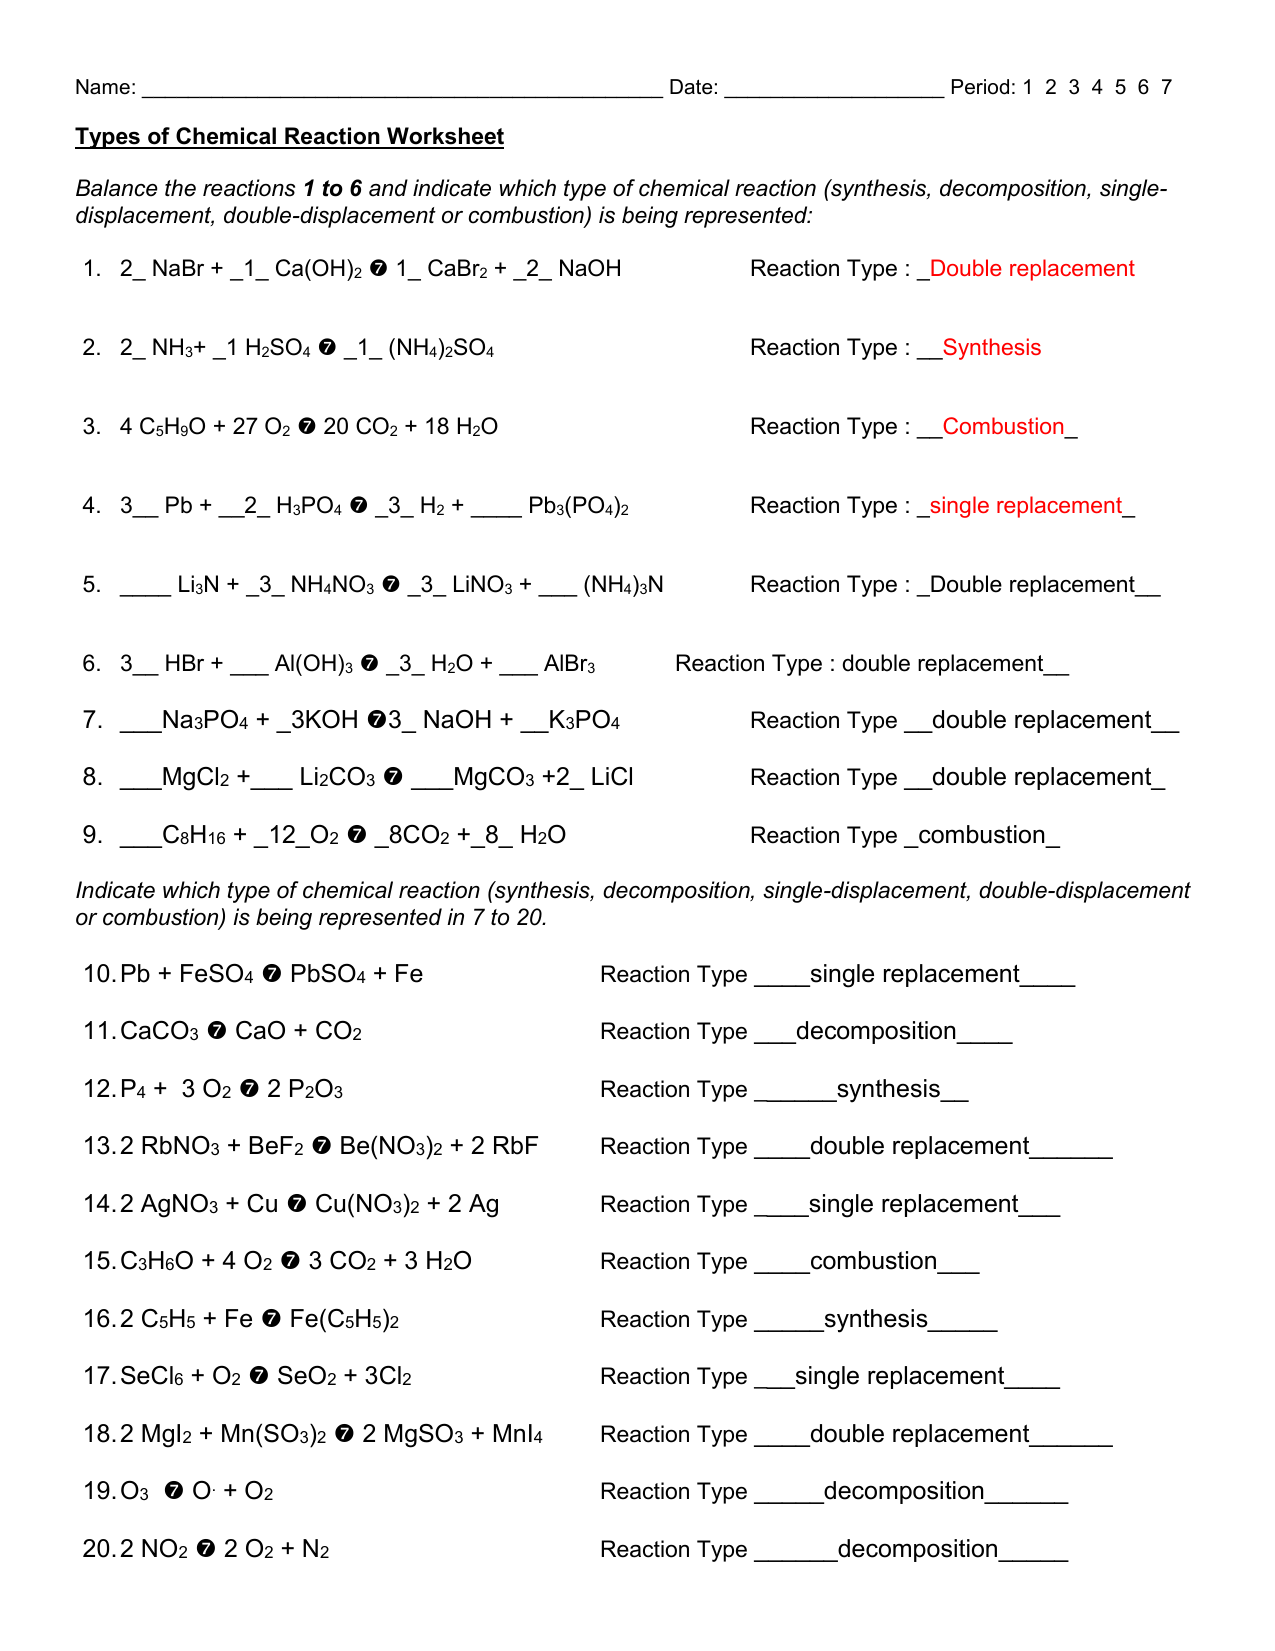 Types of Chemical Reaction Worksheetanswers Inside Types Of Chemical Reactions Worksheet